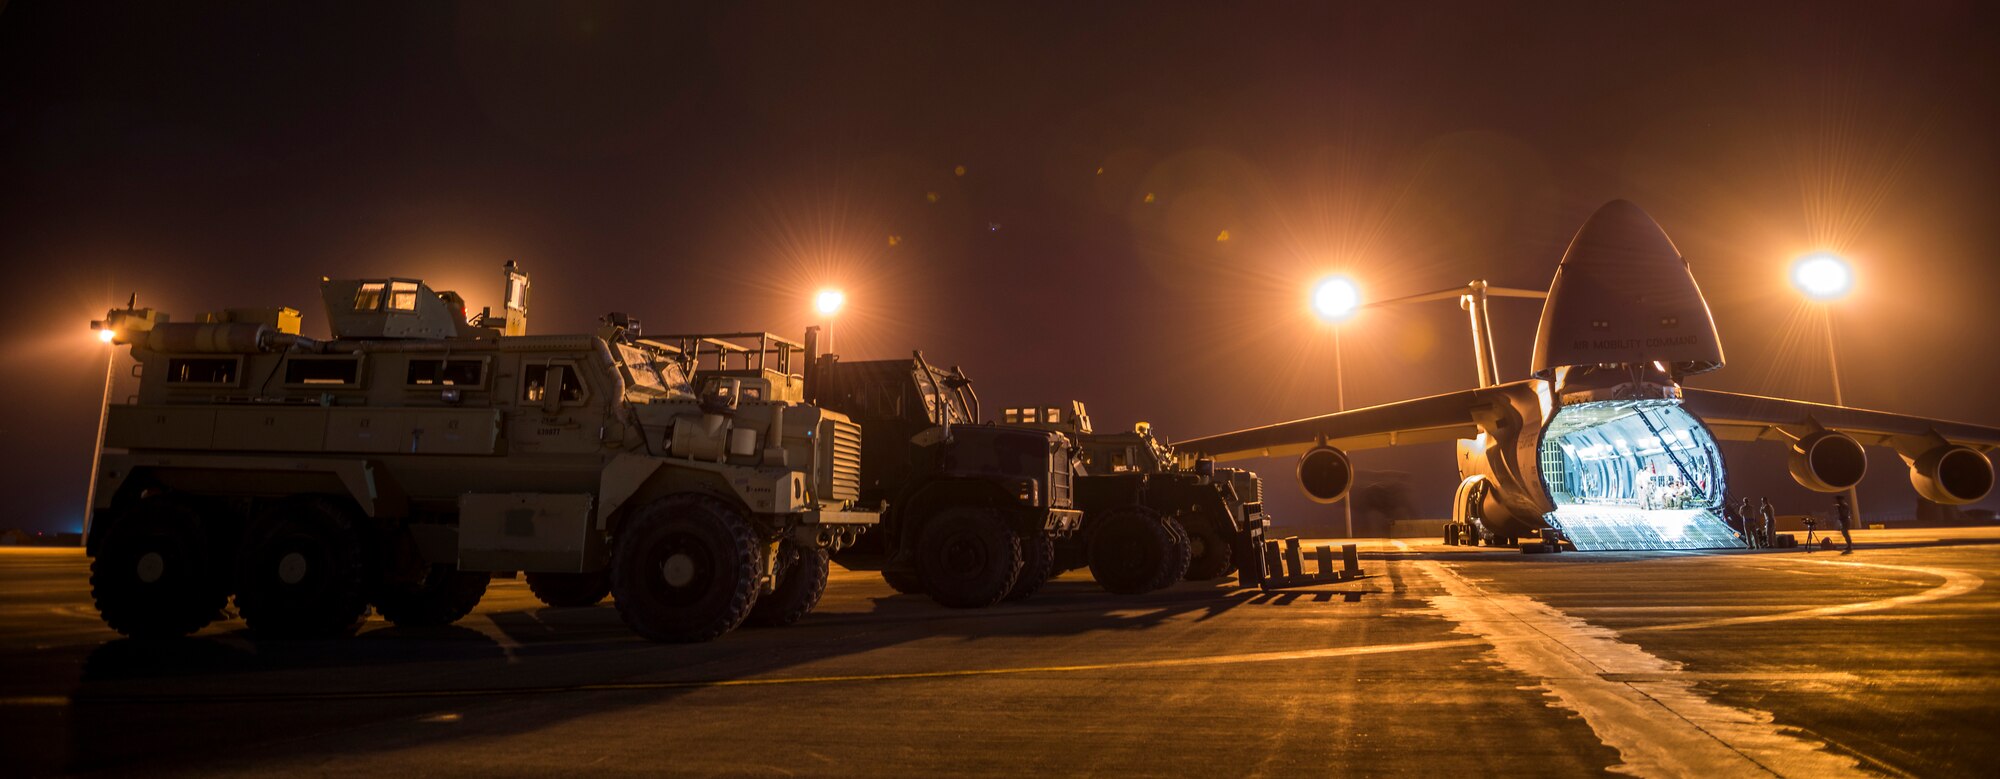 Airmen from the 9th Airlift Squadron and 455th Expeditionary Aerial Port Squadron with Marines from the Marine Expeditionary Brigade prepare to load vehicles into a C-5M Super Galaxy Oct. 6, 2014, at Camp Bastion, Afghanistan. Airmen and Marines loaded more than 266,000 pounds of cargo onto the C-5M as part of retrograde operations in Afghanistan. Aircrews for the retrograde operations, managed by the 385th Air Expeditionary Group Detachment 1, surpassed 11 million pounds of cargo transported in a 50-day period. During this time frame, crews under the 385th AEG broke Air Mobility Command???s operational cargo load record five times. The heaviest load to date is 280,880 pounds. (U.S. Air Force photo by Staff Sgt. Jeremy Bowcock)